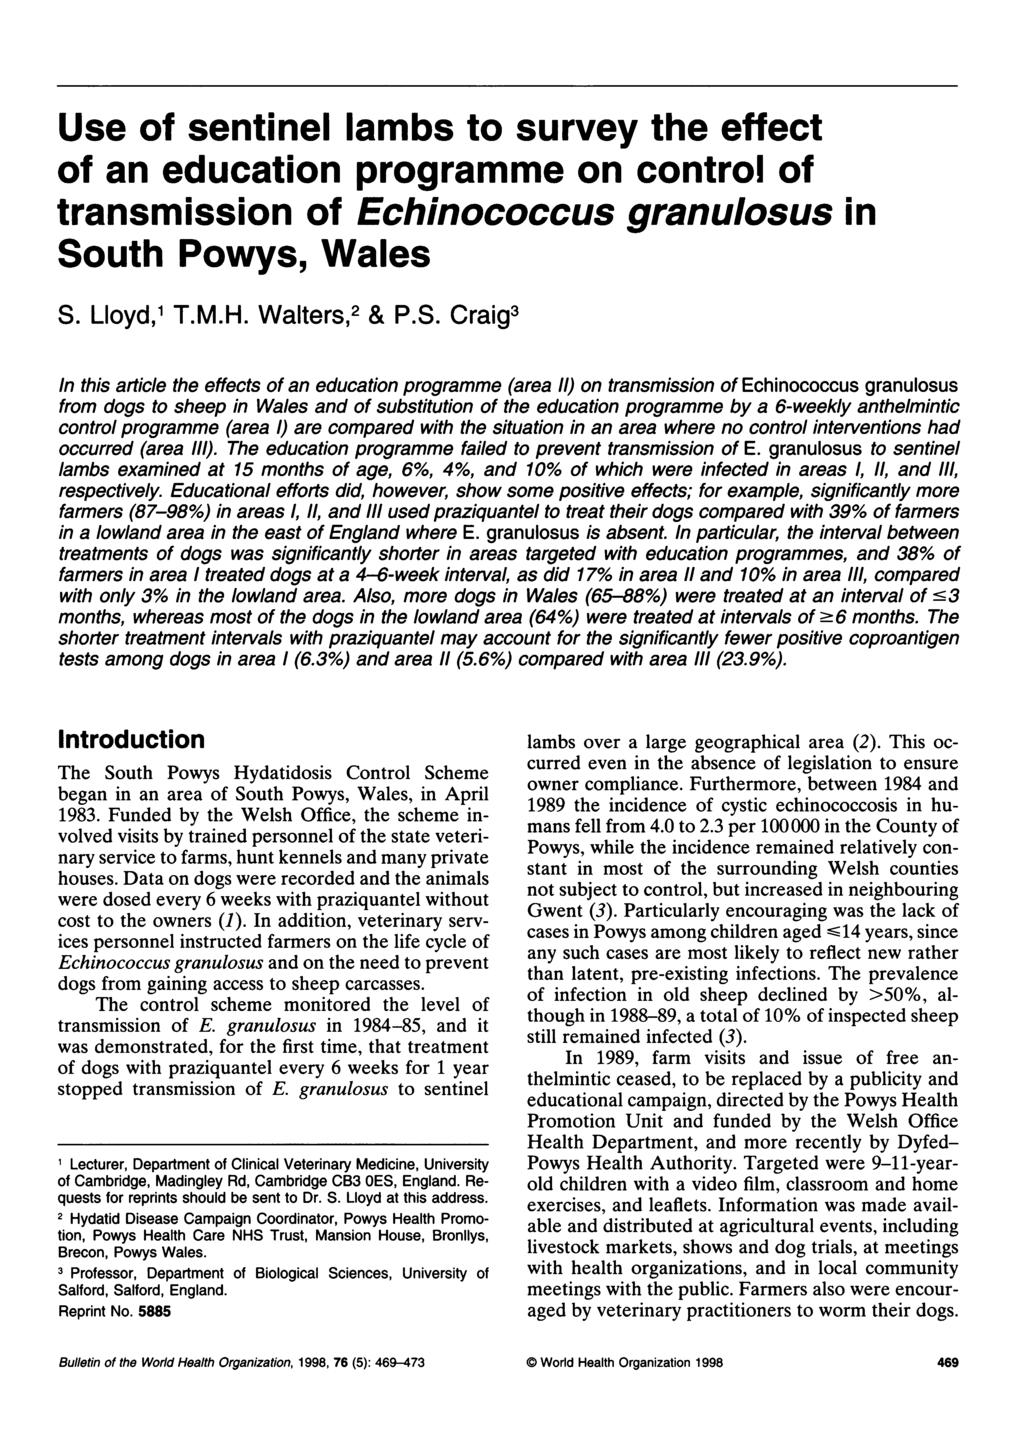 Use of sentinel lambs to survey the effect of an education programme on control of transmission of Echinococcus granulosus in So